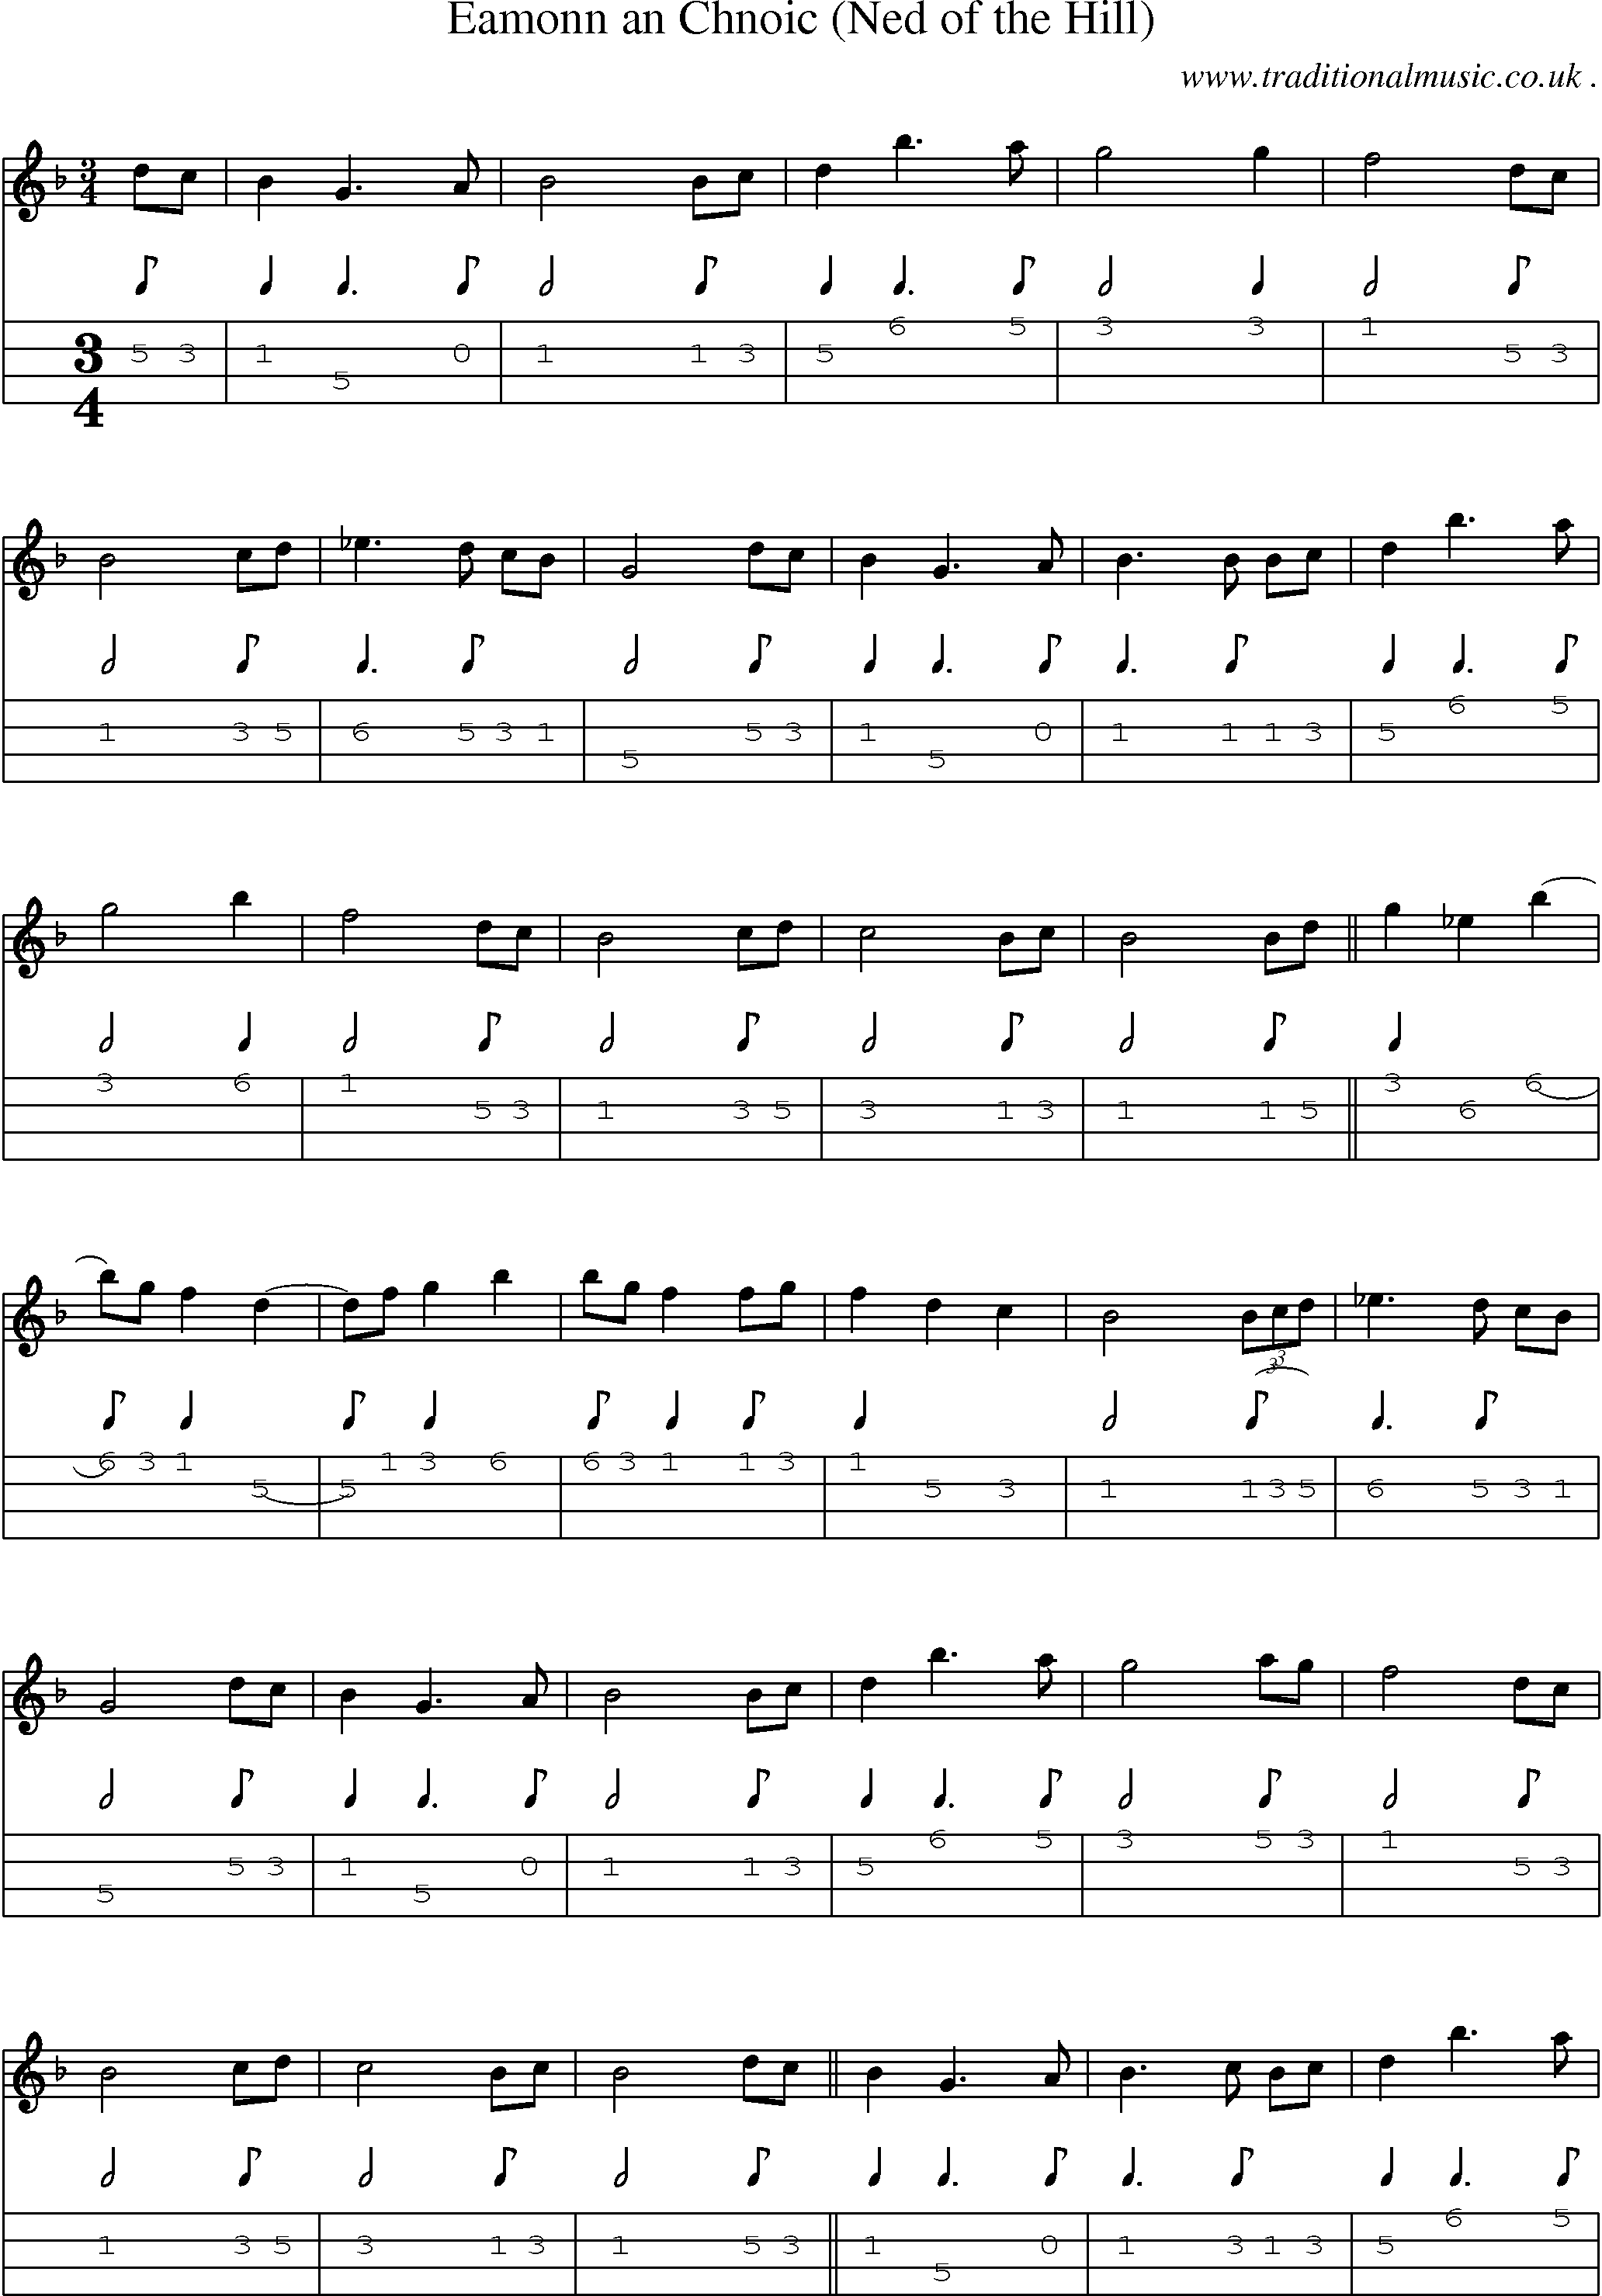 Sheet-Music and Mandolin Tabs for Eamonn An Chnoic (ned Of The Hill)